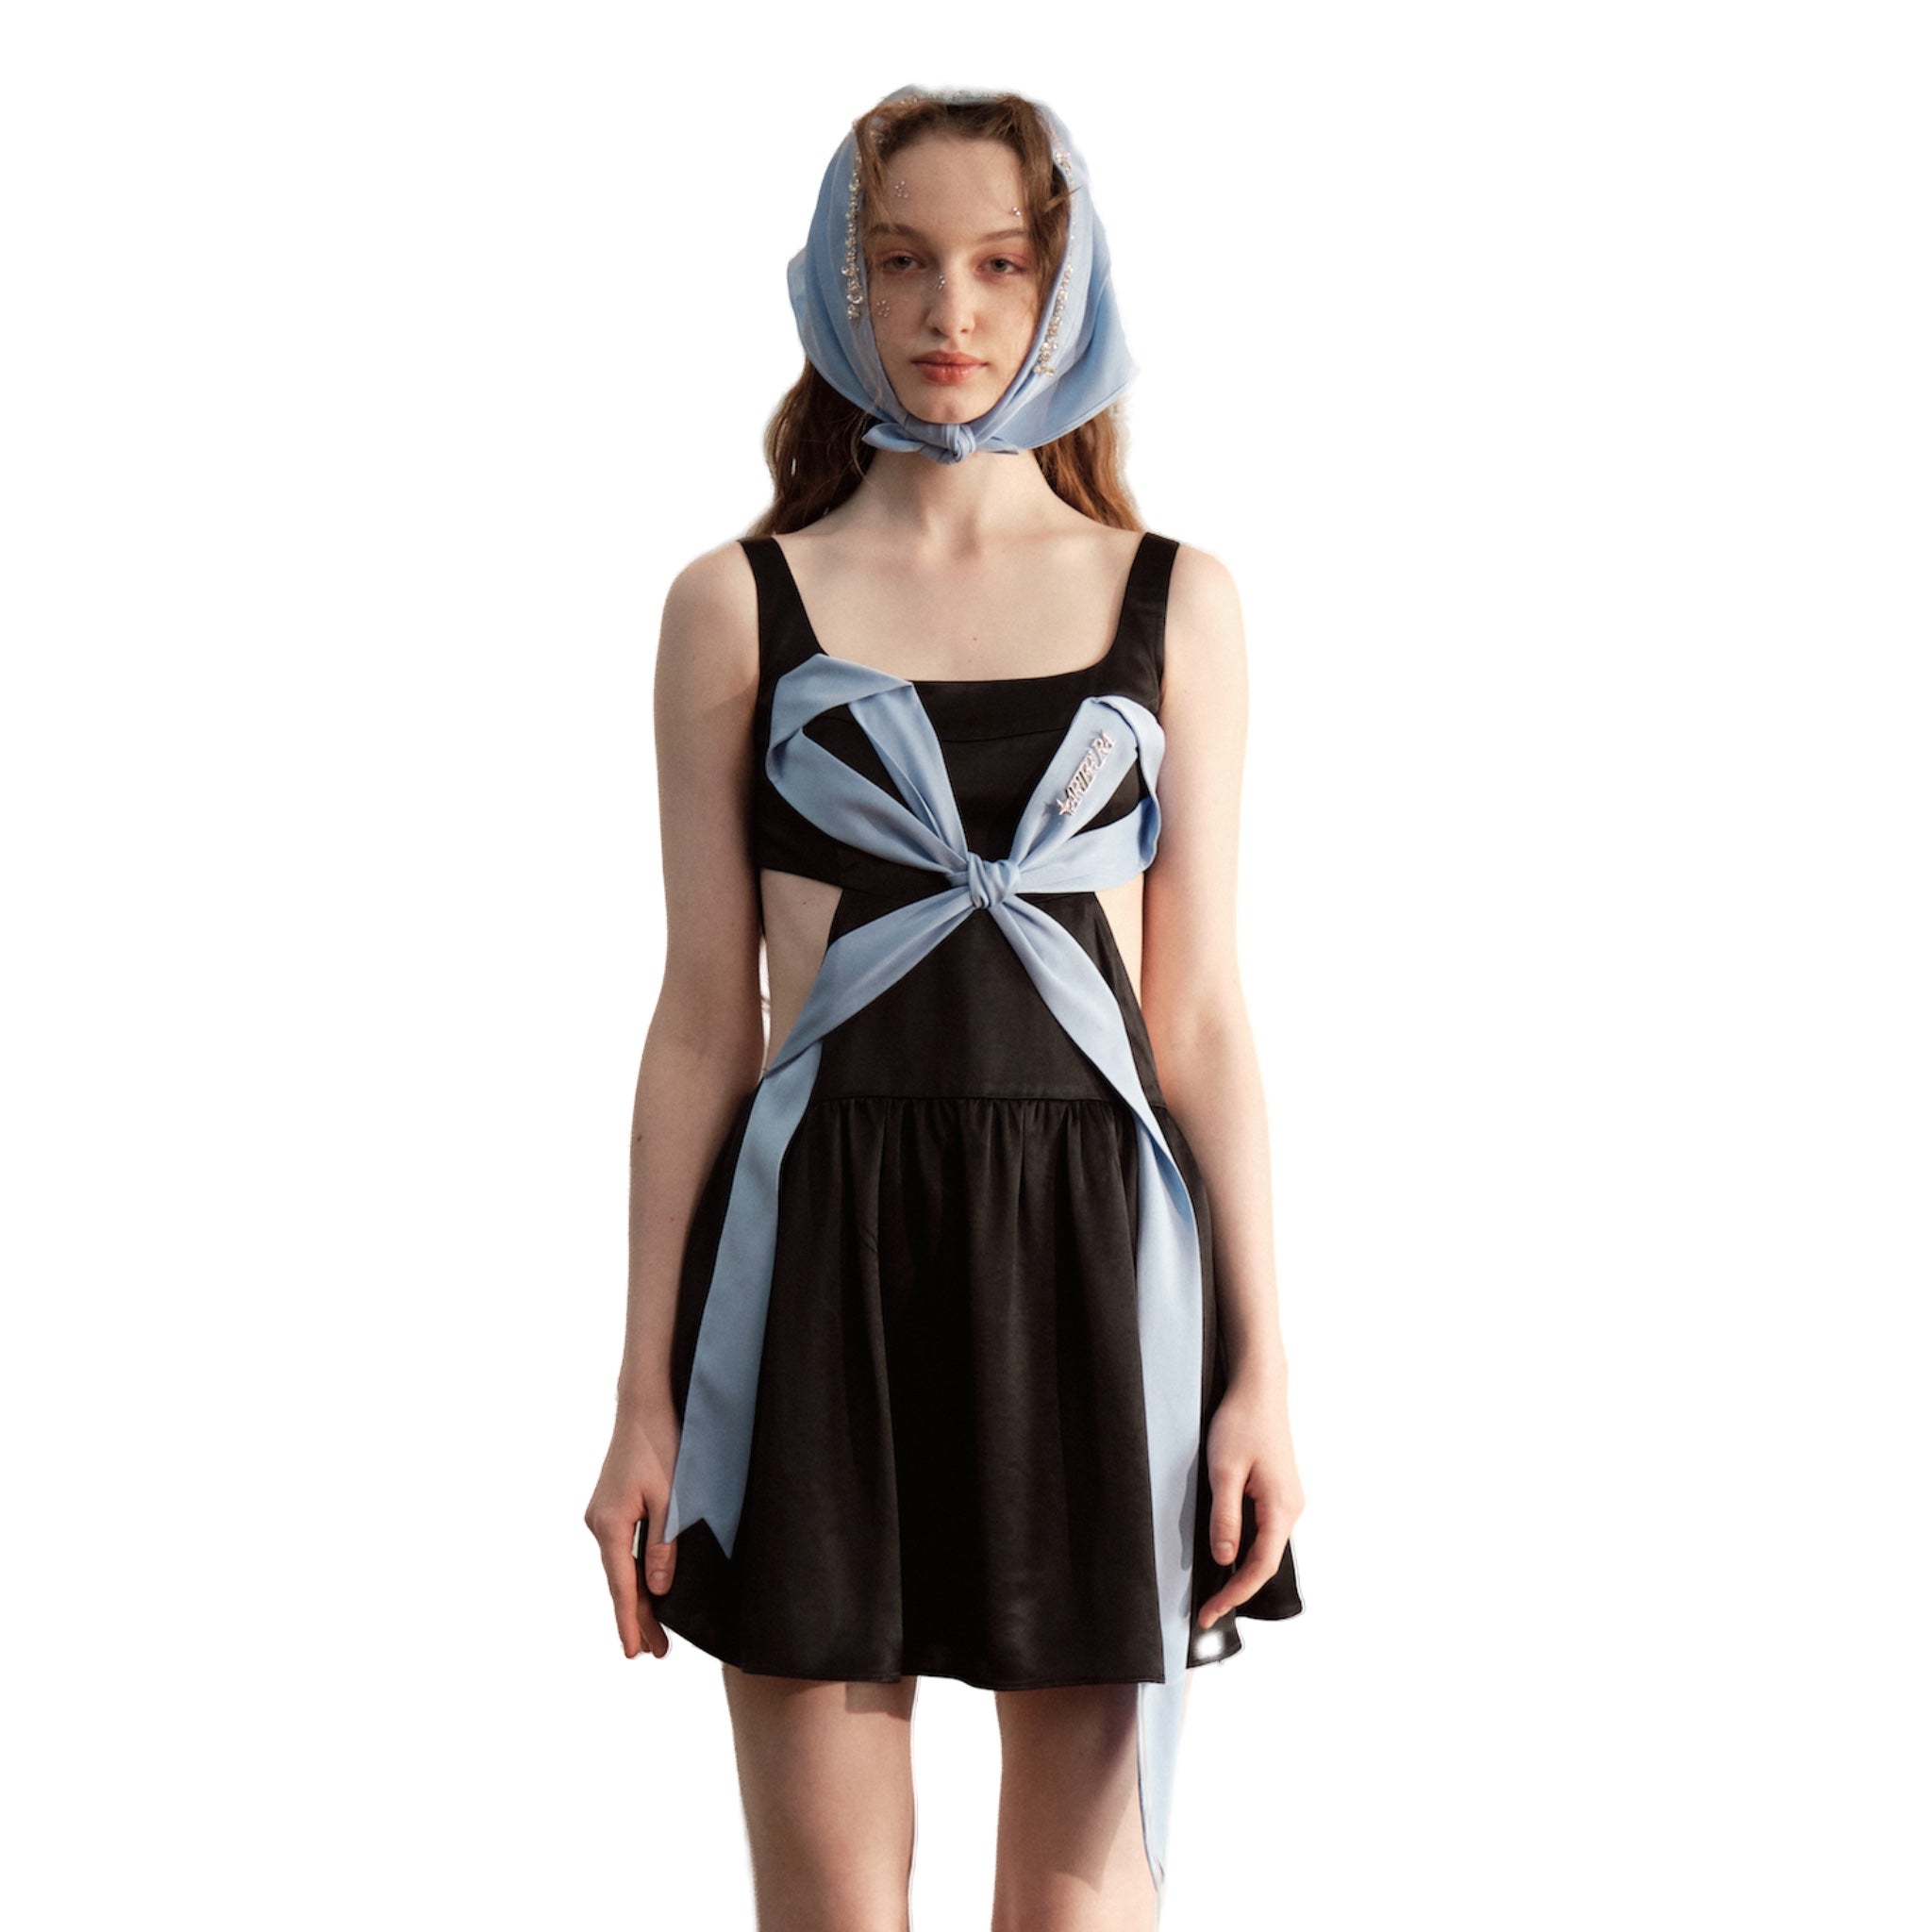 Black Hollow Slip Dress With Blue Bow Tie